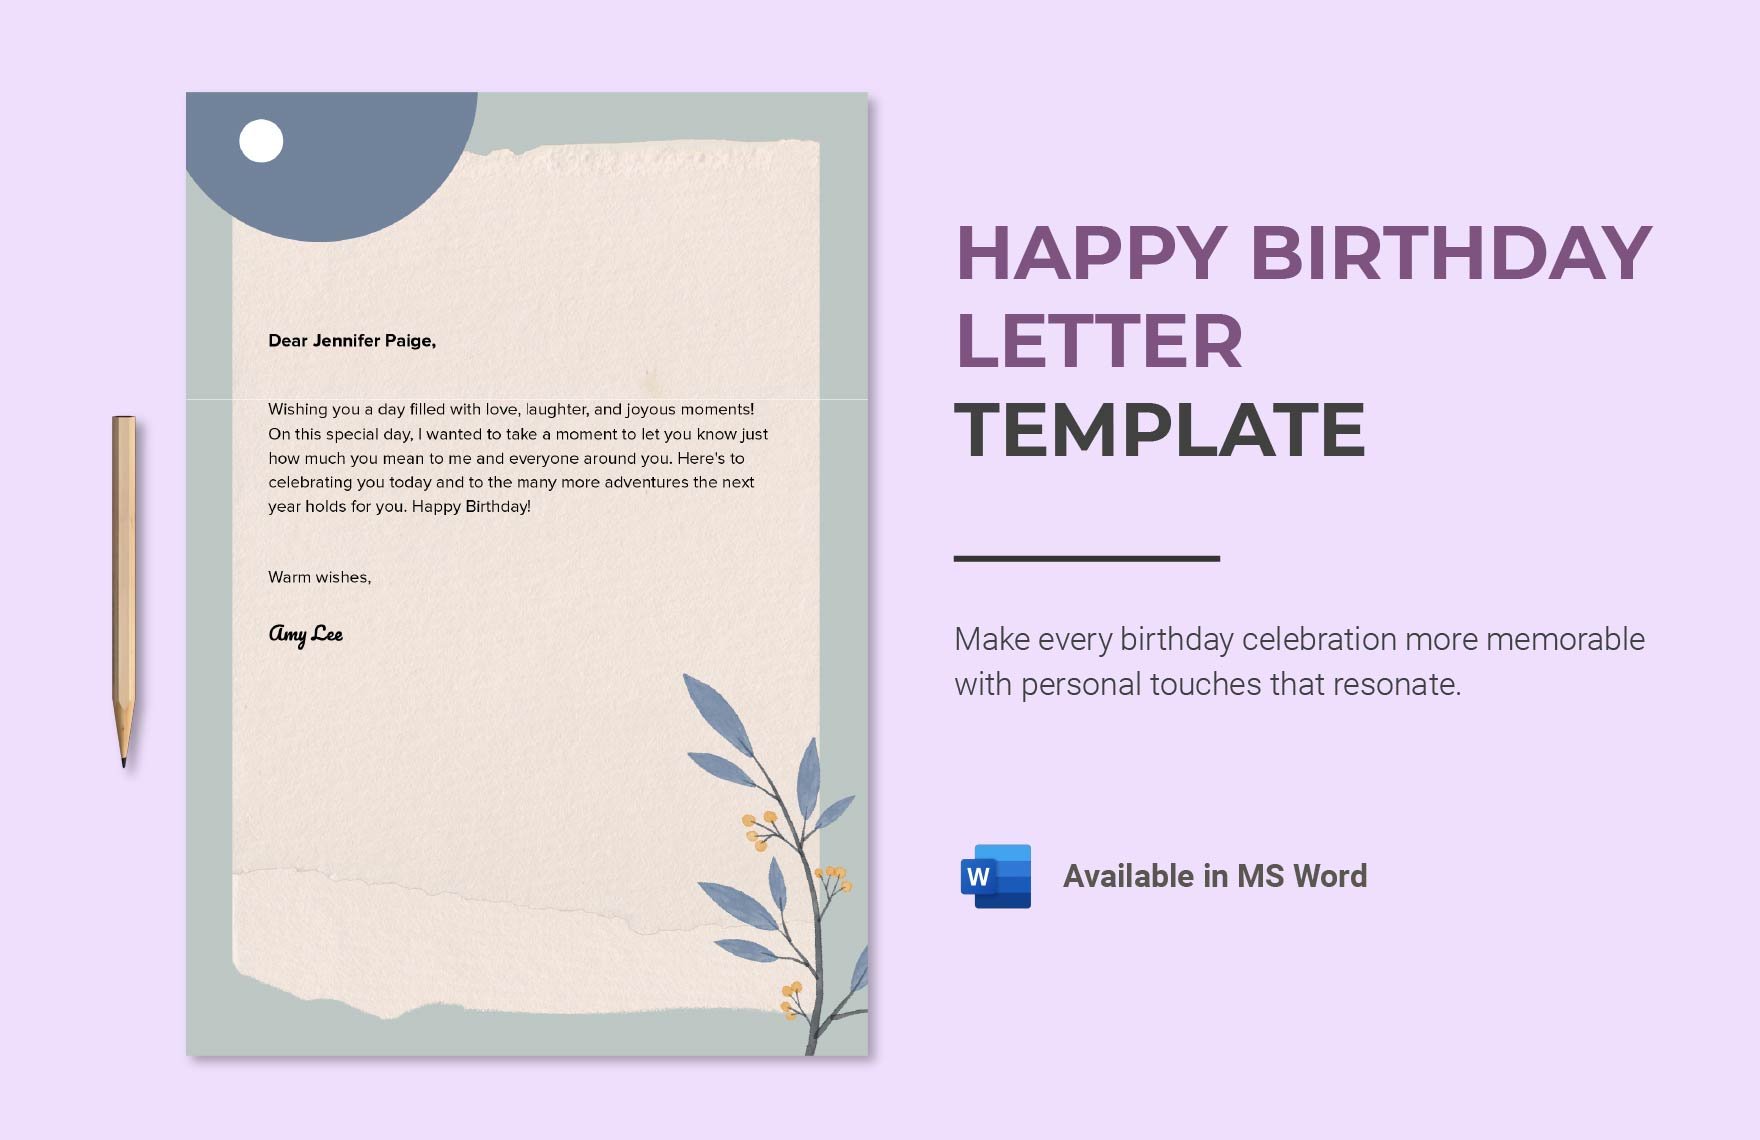 Happy Birthday Letter Template